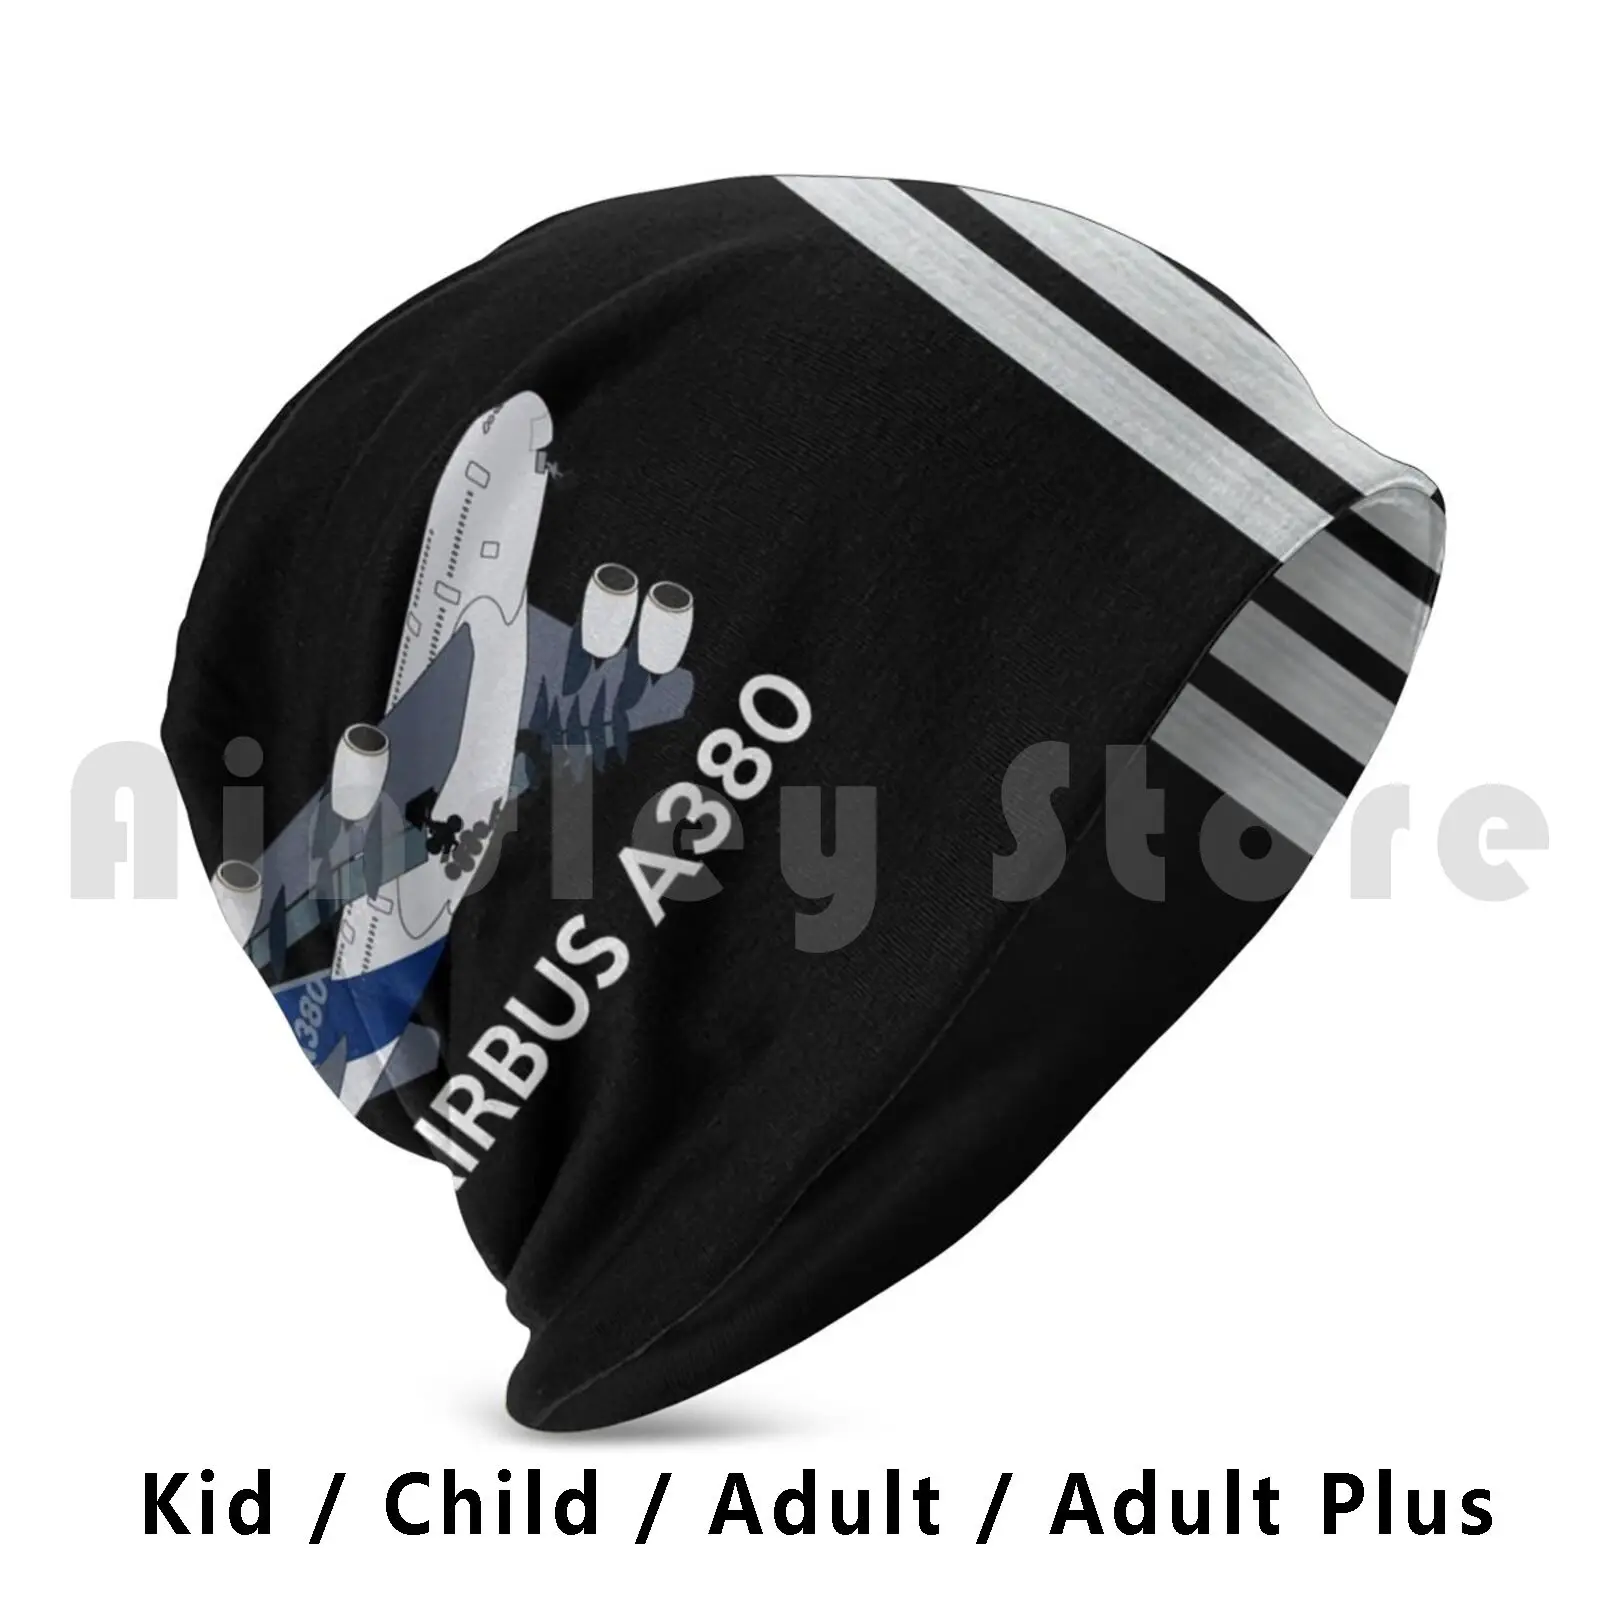 

A380 Stripes Beanies Knit Hat Hip Hop Aviation A380 Airbus Boeing Captain Pilot Fly Flying Plane Airplane Airplane